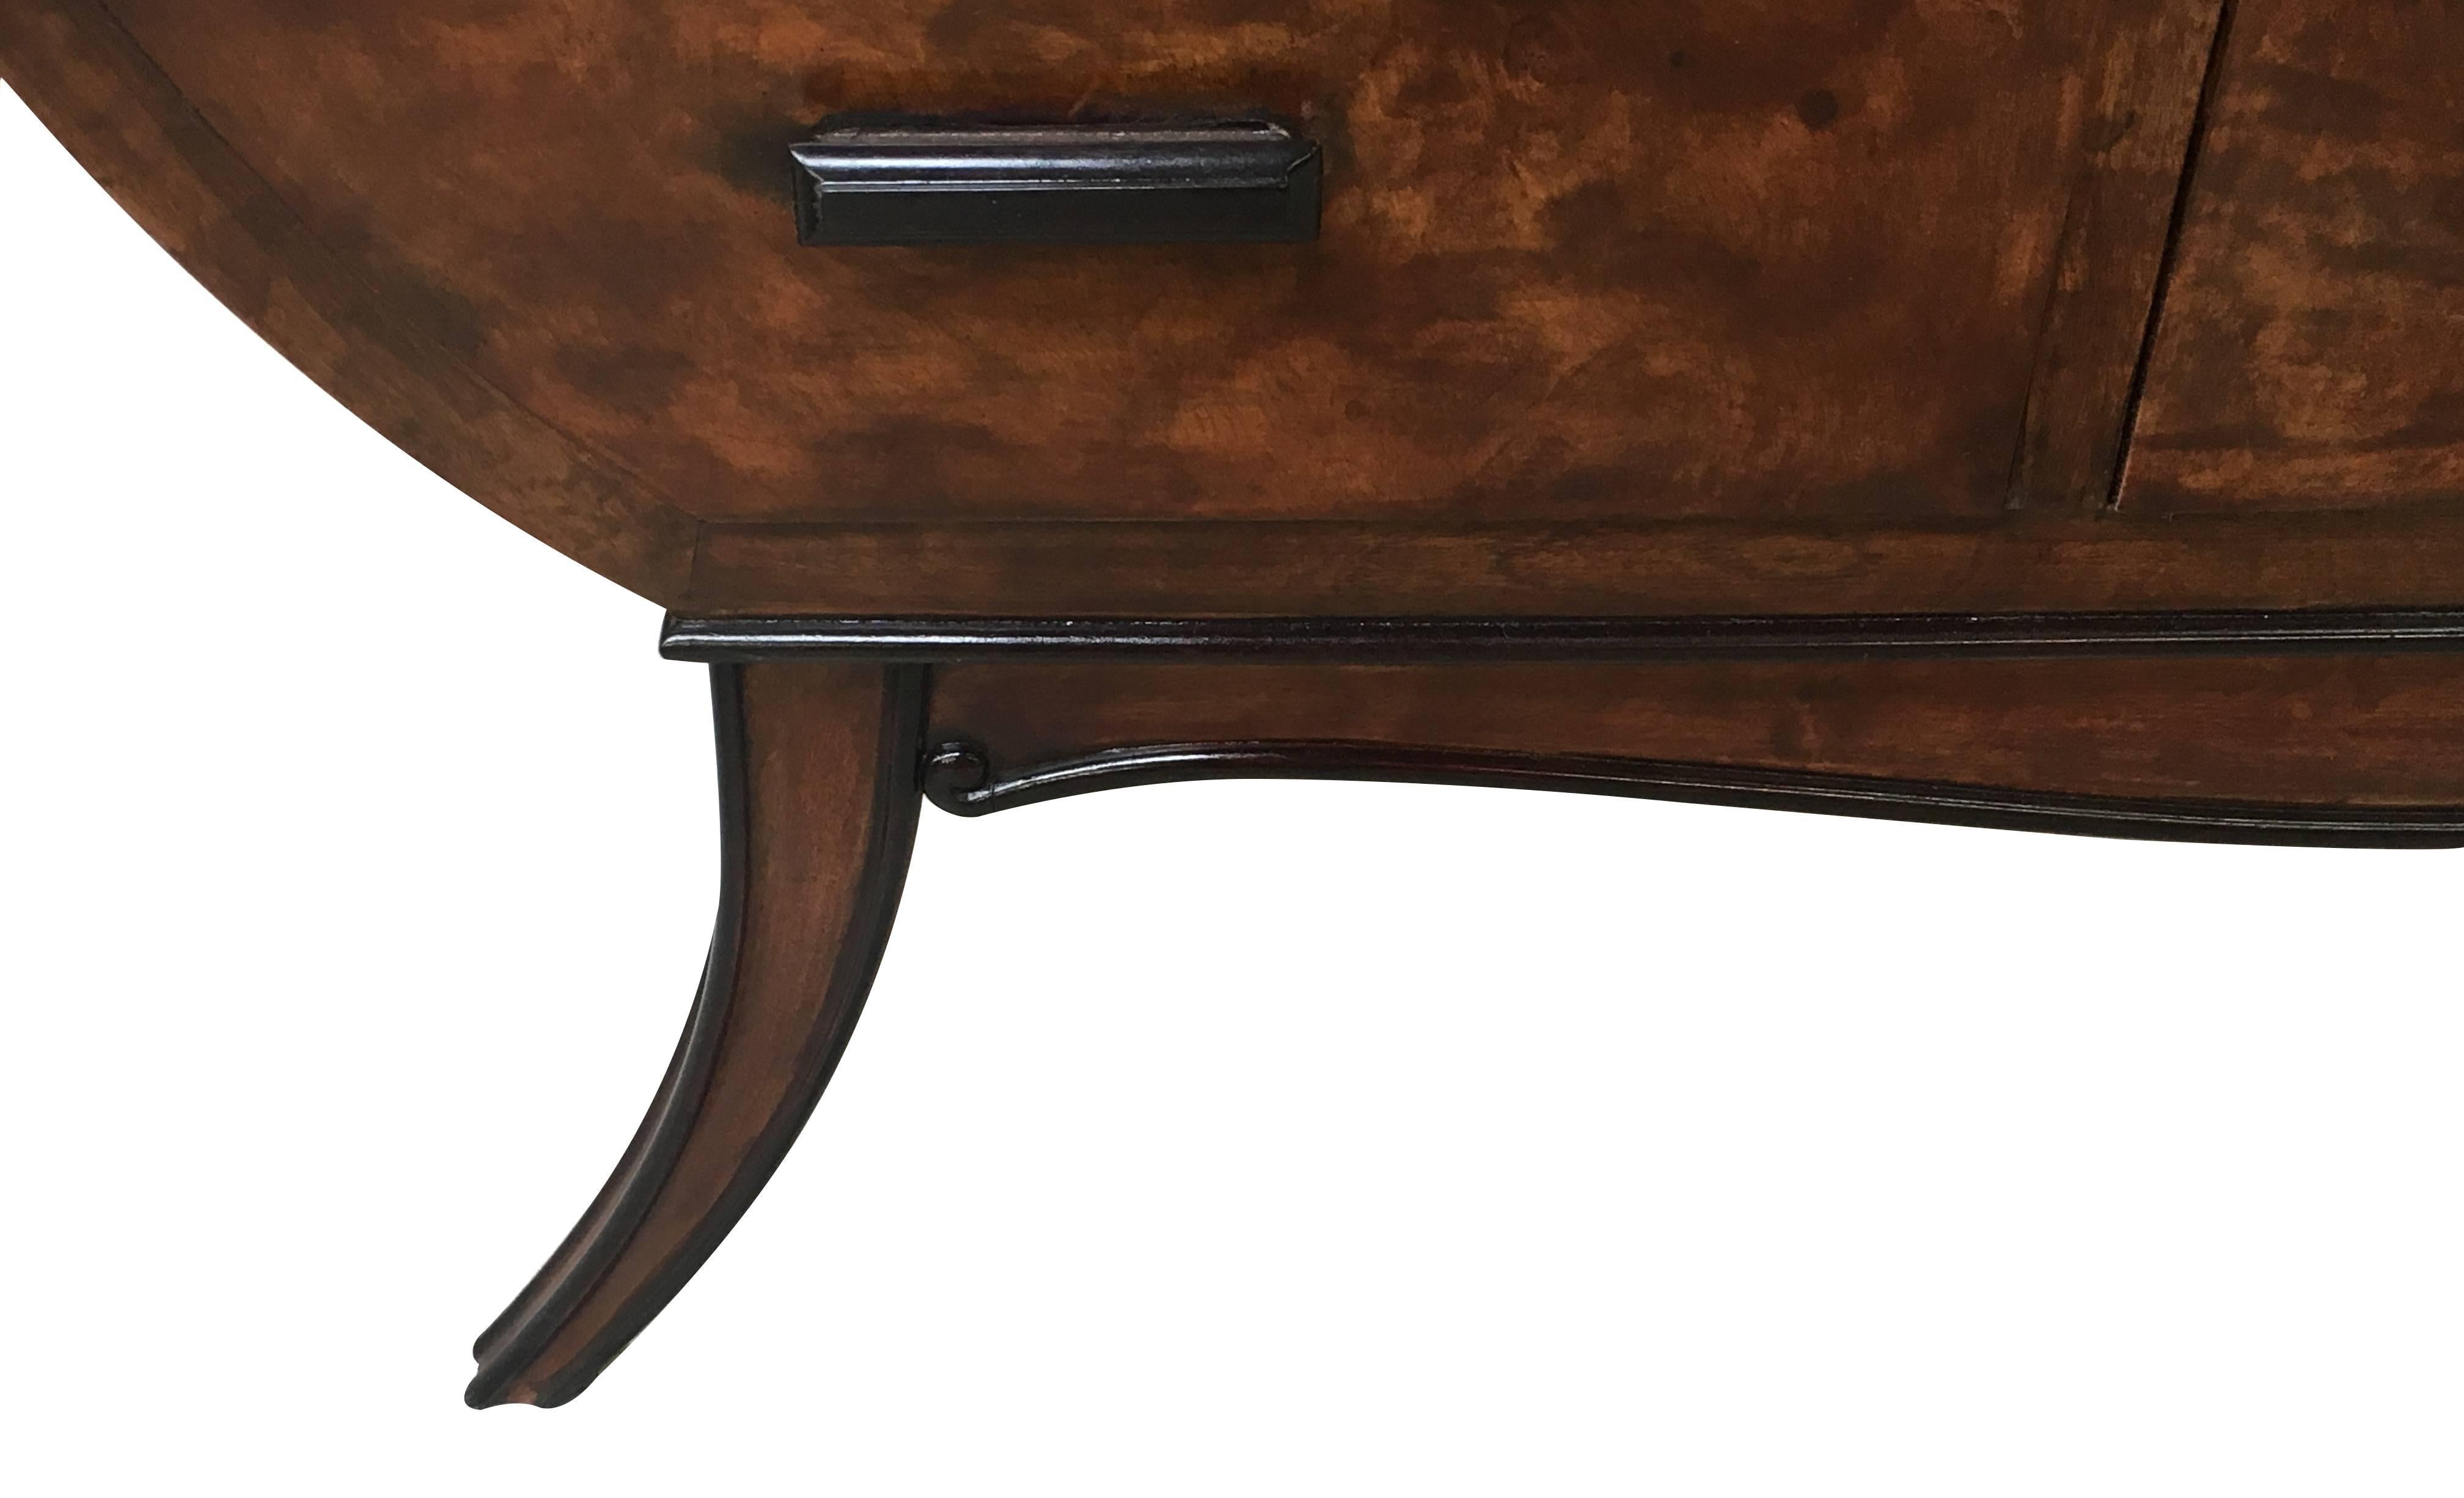 The voluptuous form with tapering curved sides raised on elegantly splayed supports all fitted with 9 short drawers; the whole in a richly-figured madrone burlwood veneer